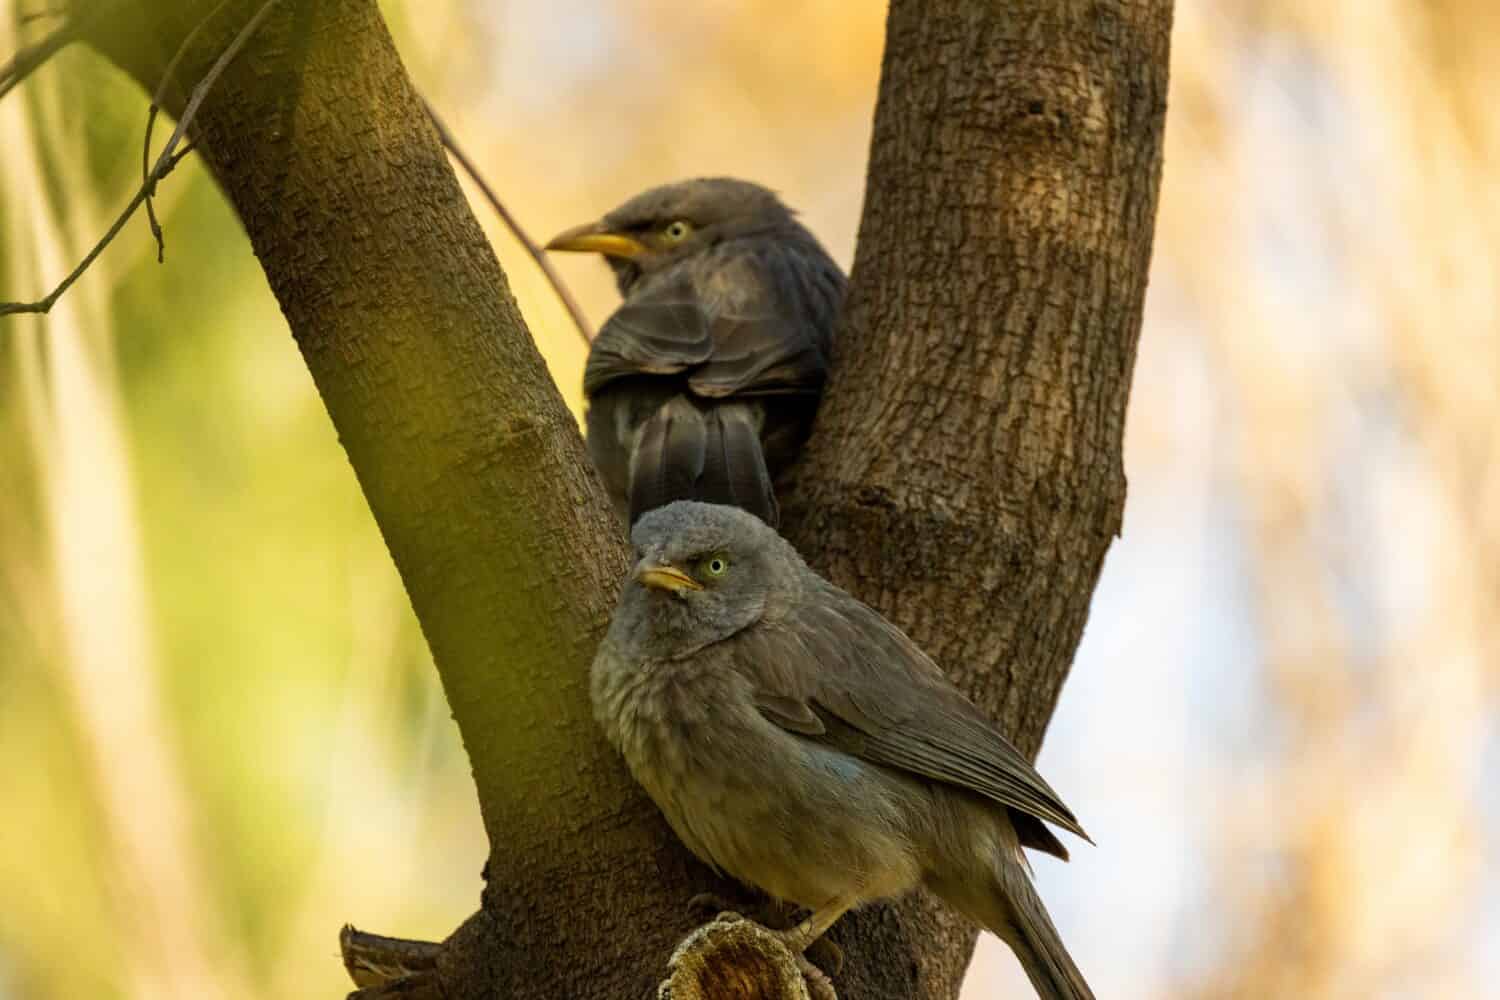 The jungle babbler is a member of the family Leiothrichidae found in the Indian subcontinent. Jungle babblers are gregarious birds that forage in small groups of six to ten birds.